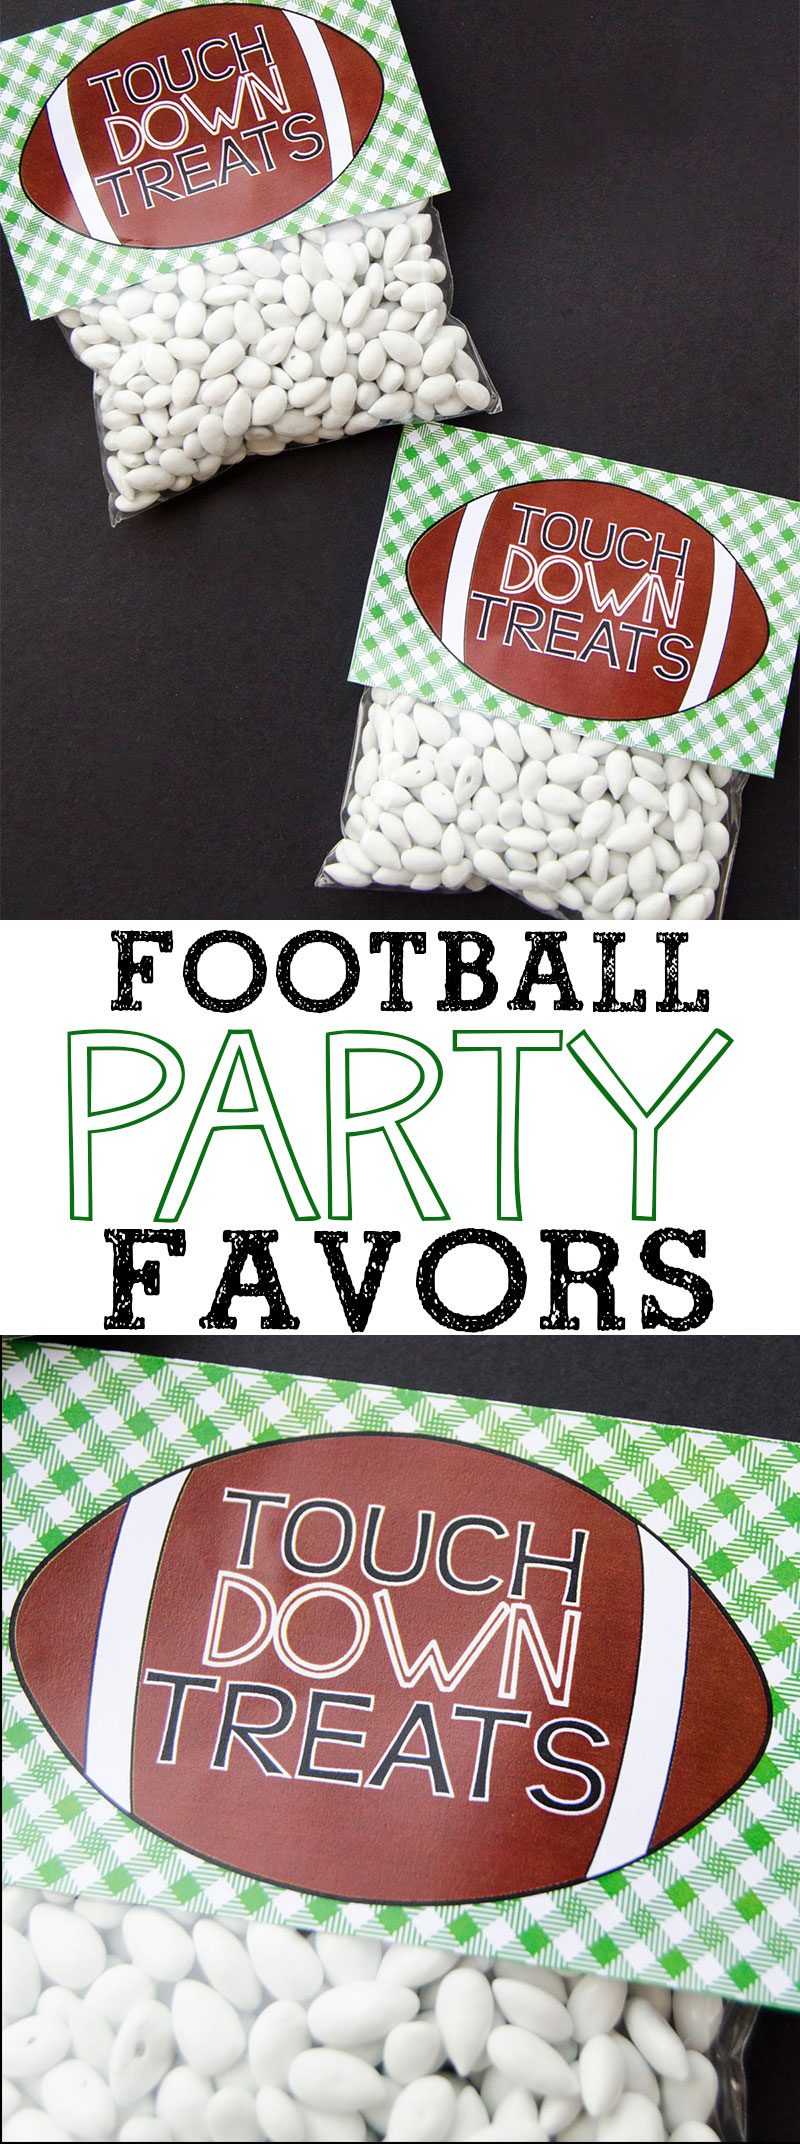 Football Party Favor FREE PRINTABLE by Lindi Haws of Love The Day